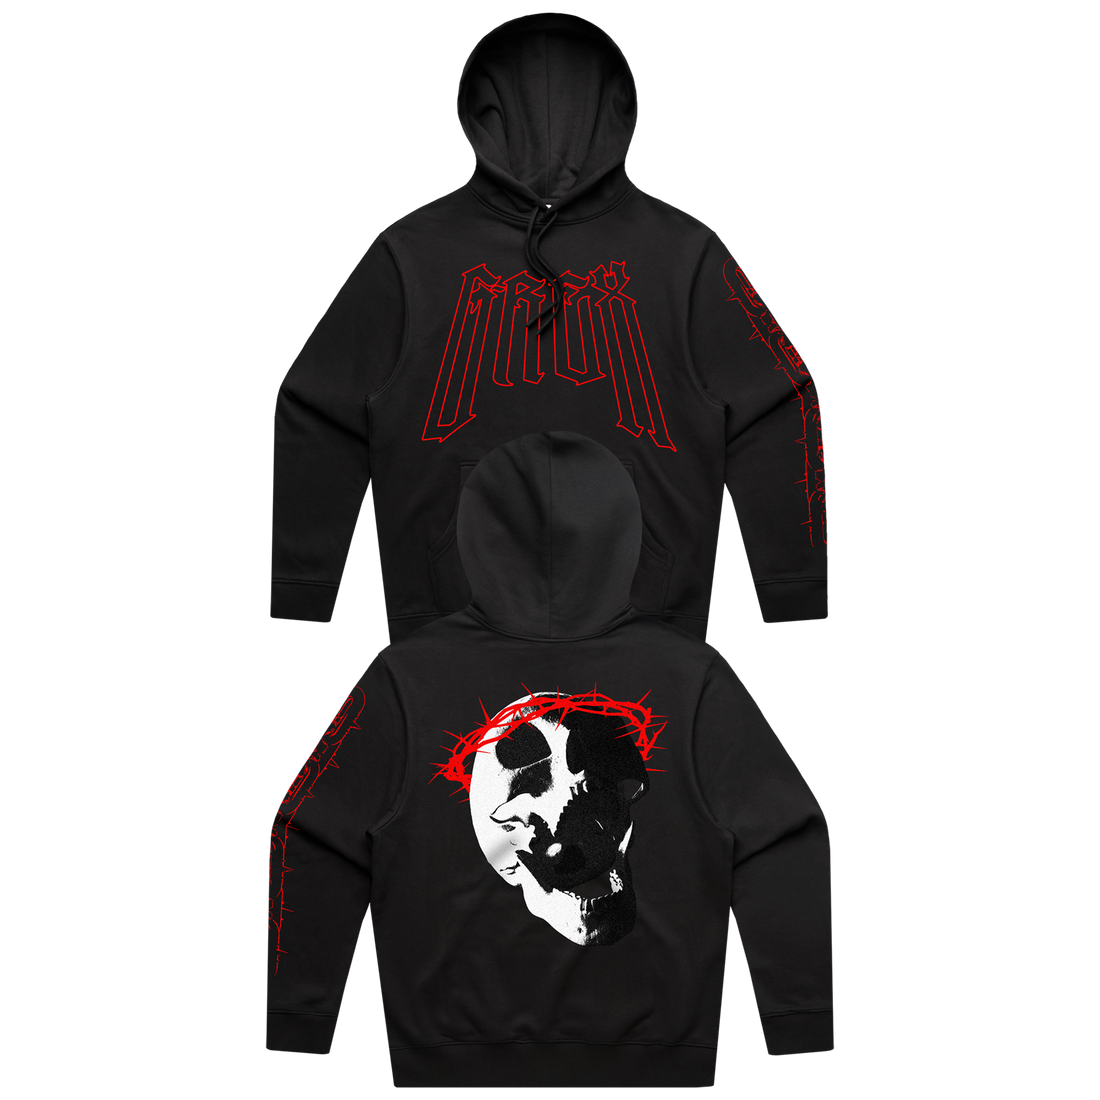 G-REX - Thorned Halo - Hoodie – KT8 Merch Co